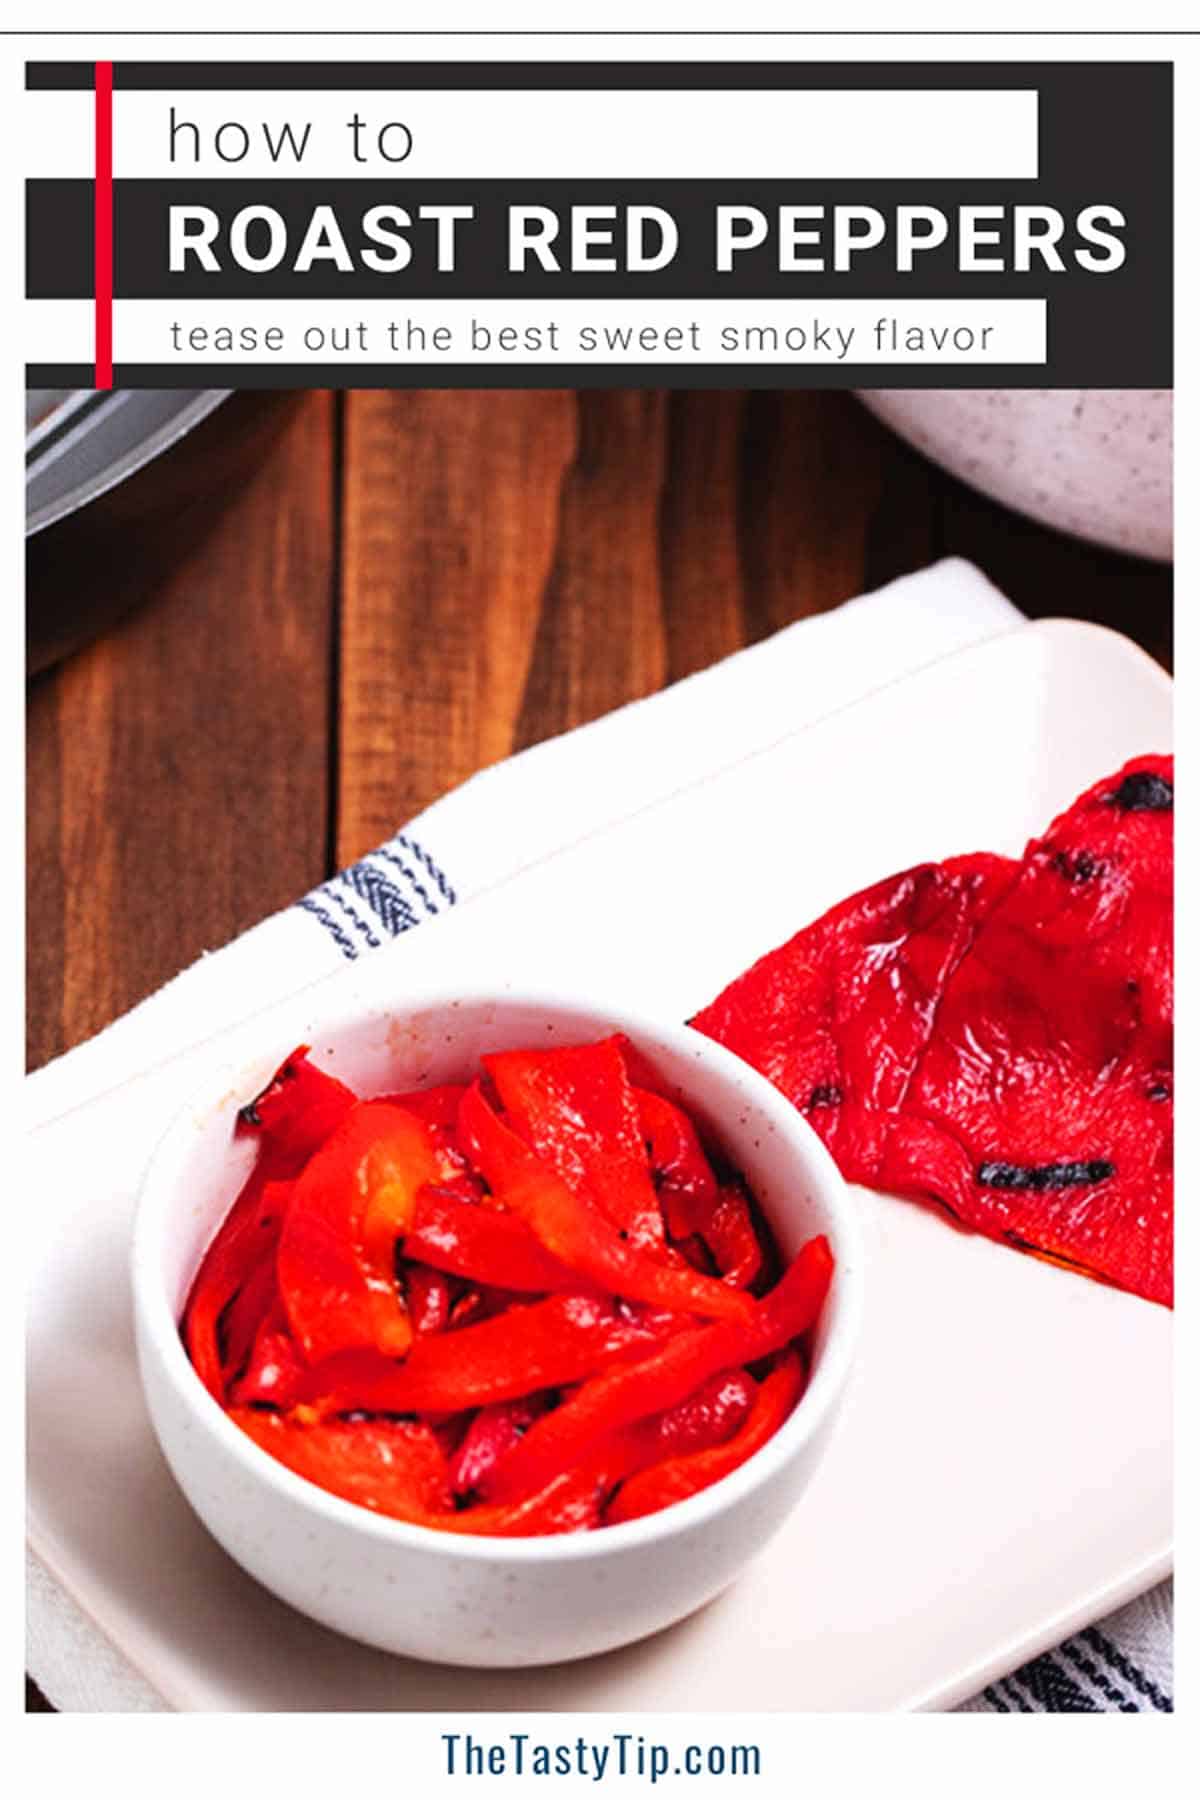 Bowl of sliced roasted red peppers and an unsliced roasted red peppers.